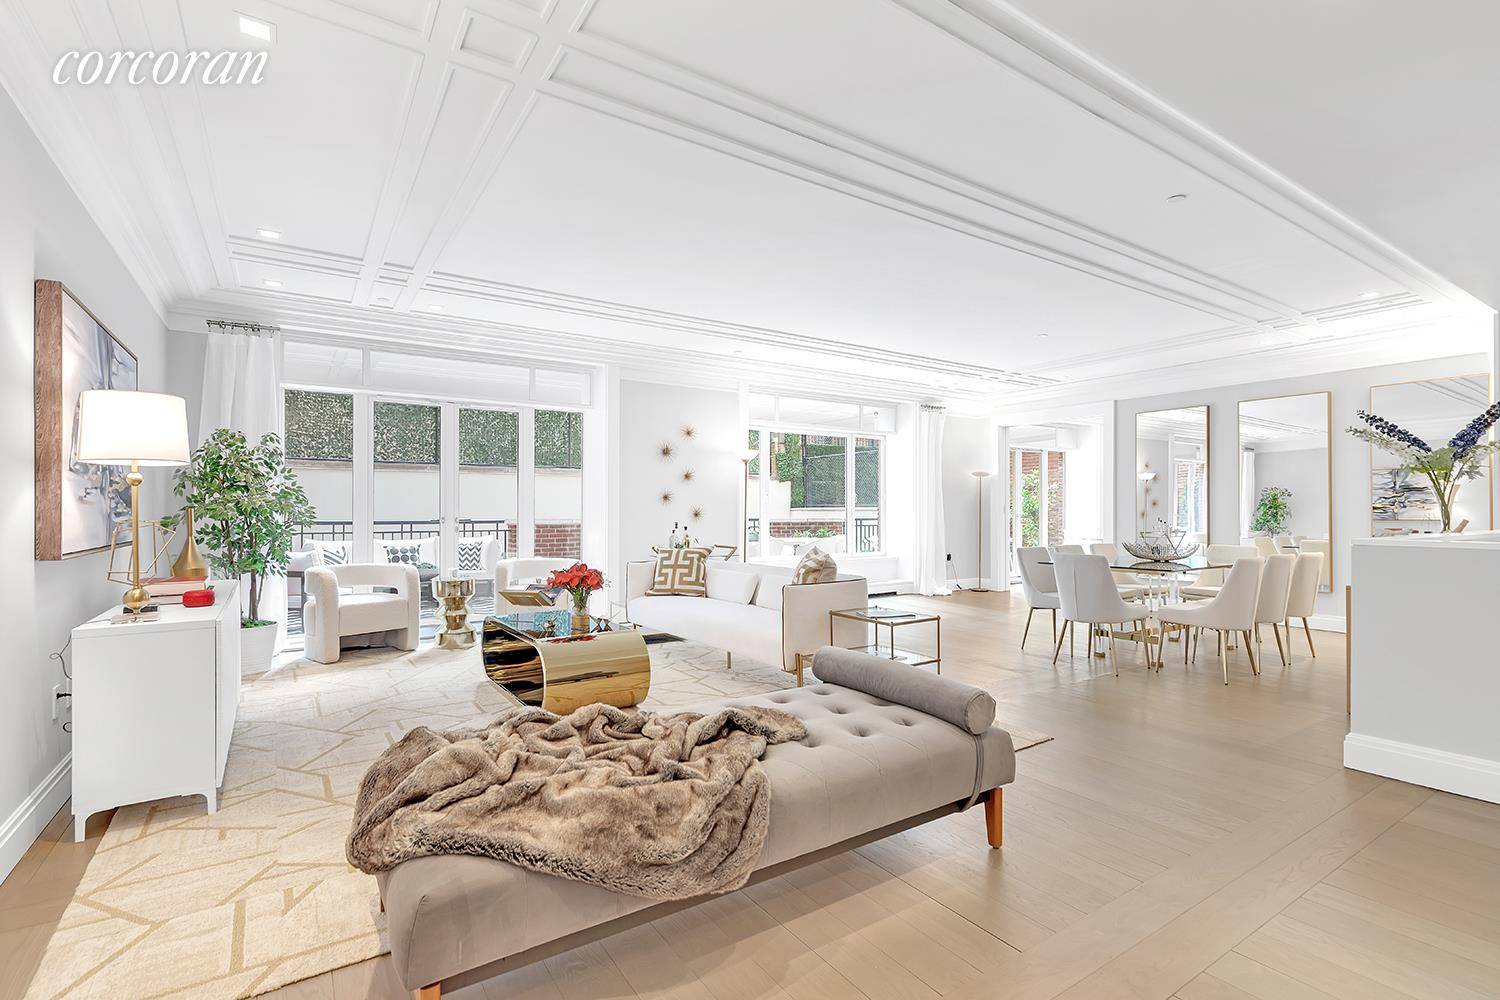 This sun filled, luxury 7 room duplex condominium on the Upper East Side's 'Gold Coast' is a stunning 4 bedroom, 3.